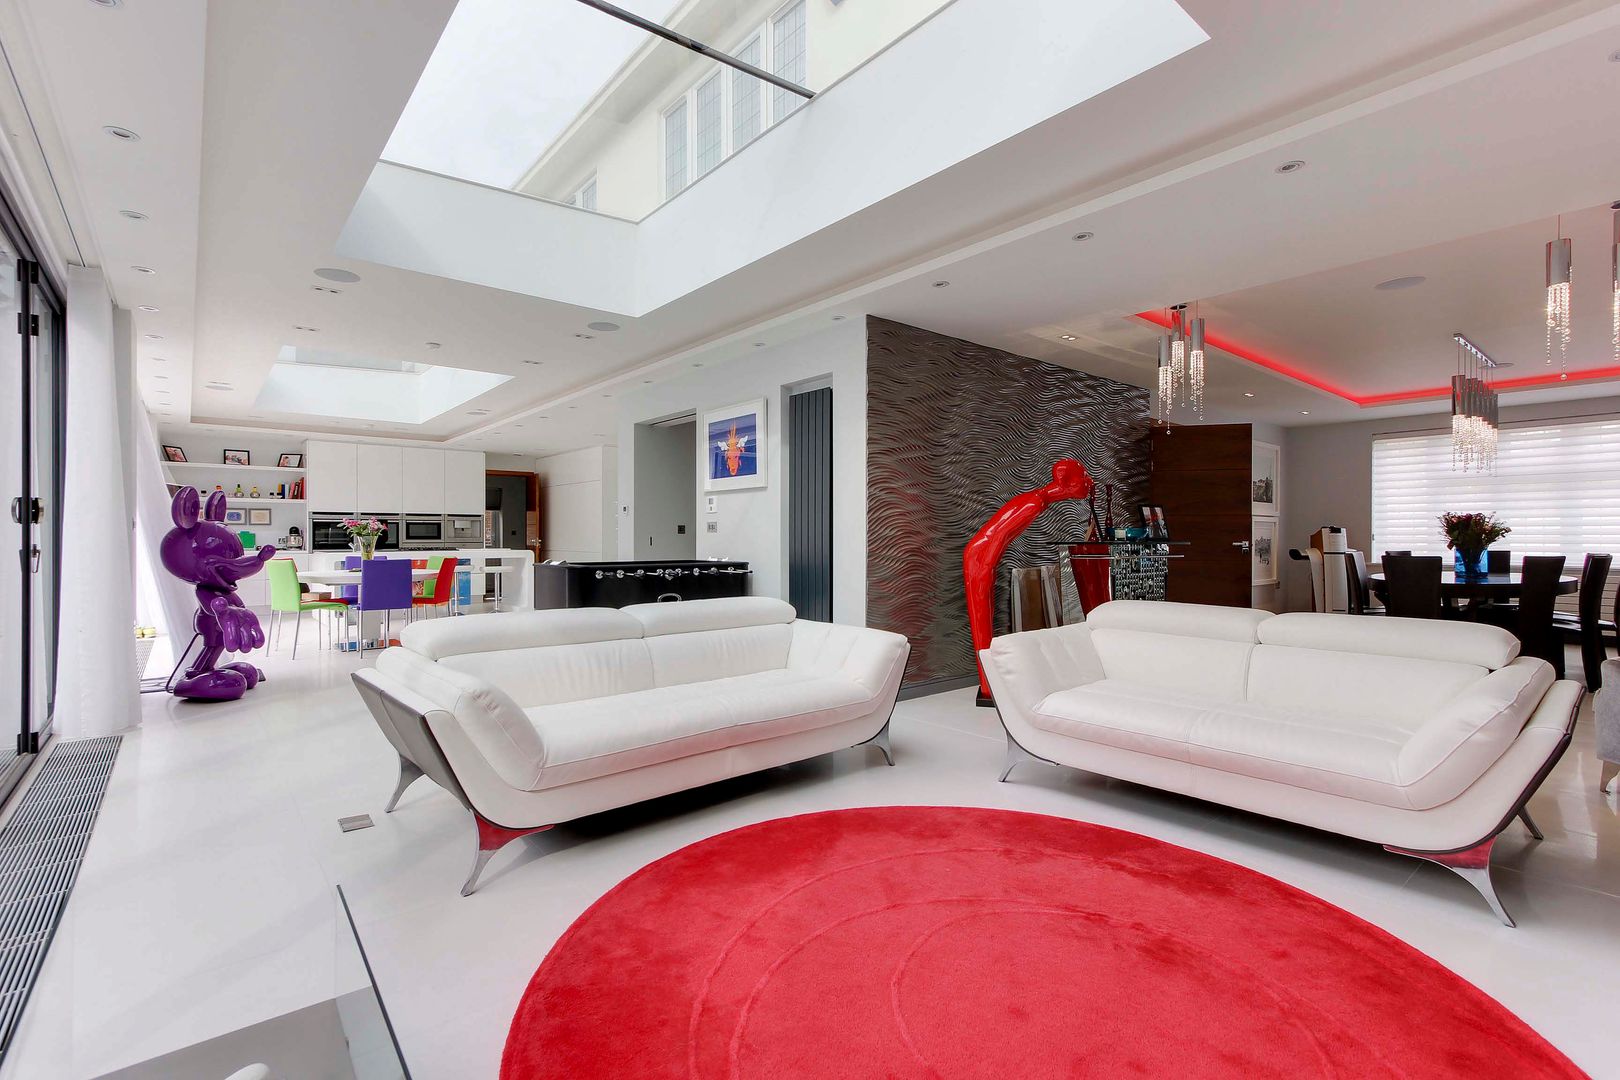 Totteridge N20 modern extension and full refurbishment Compass Design & Build Phòng khách lounge area , open plan living